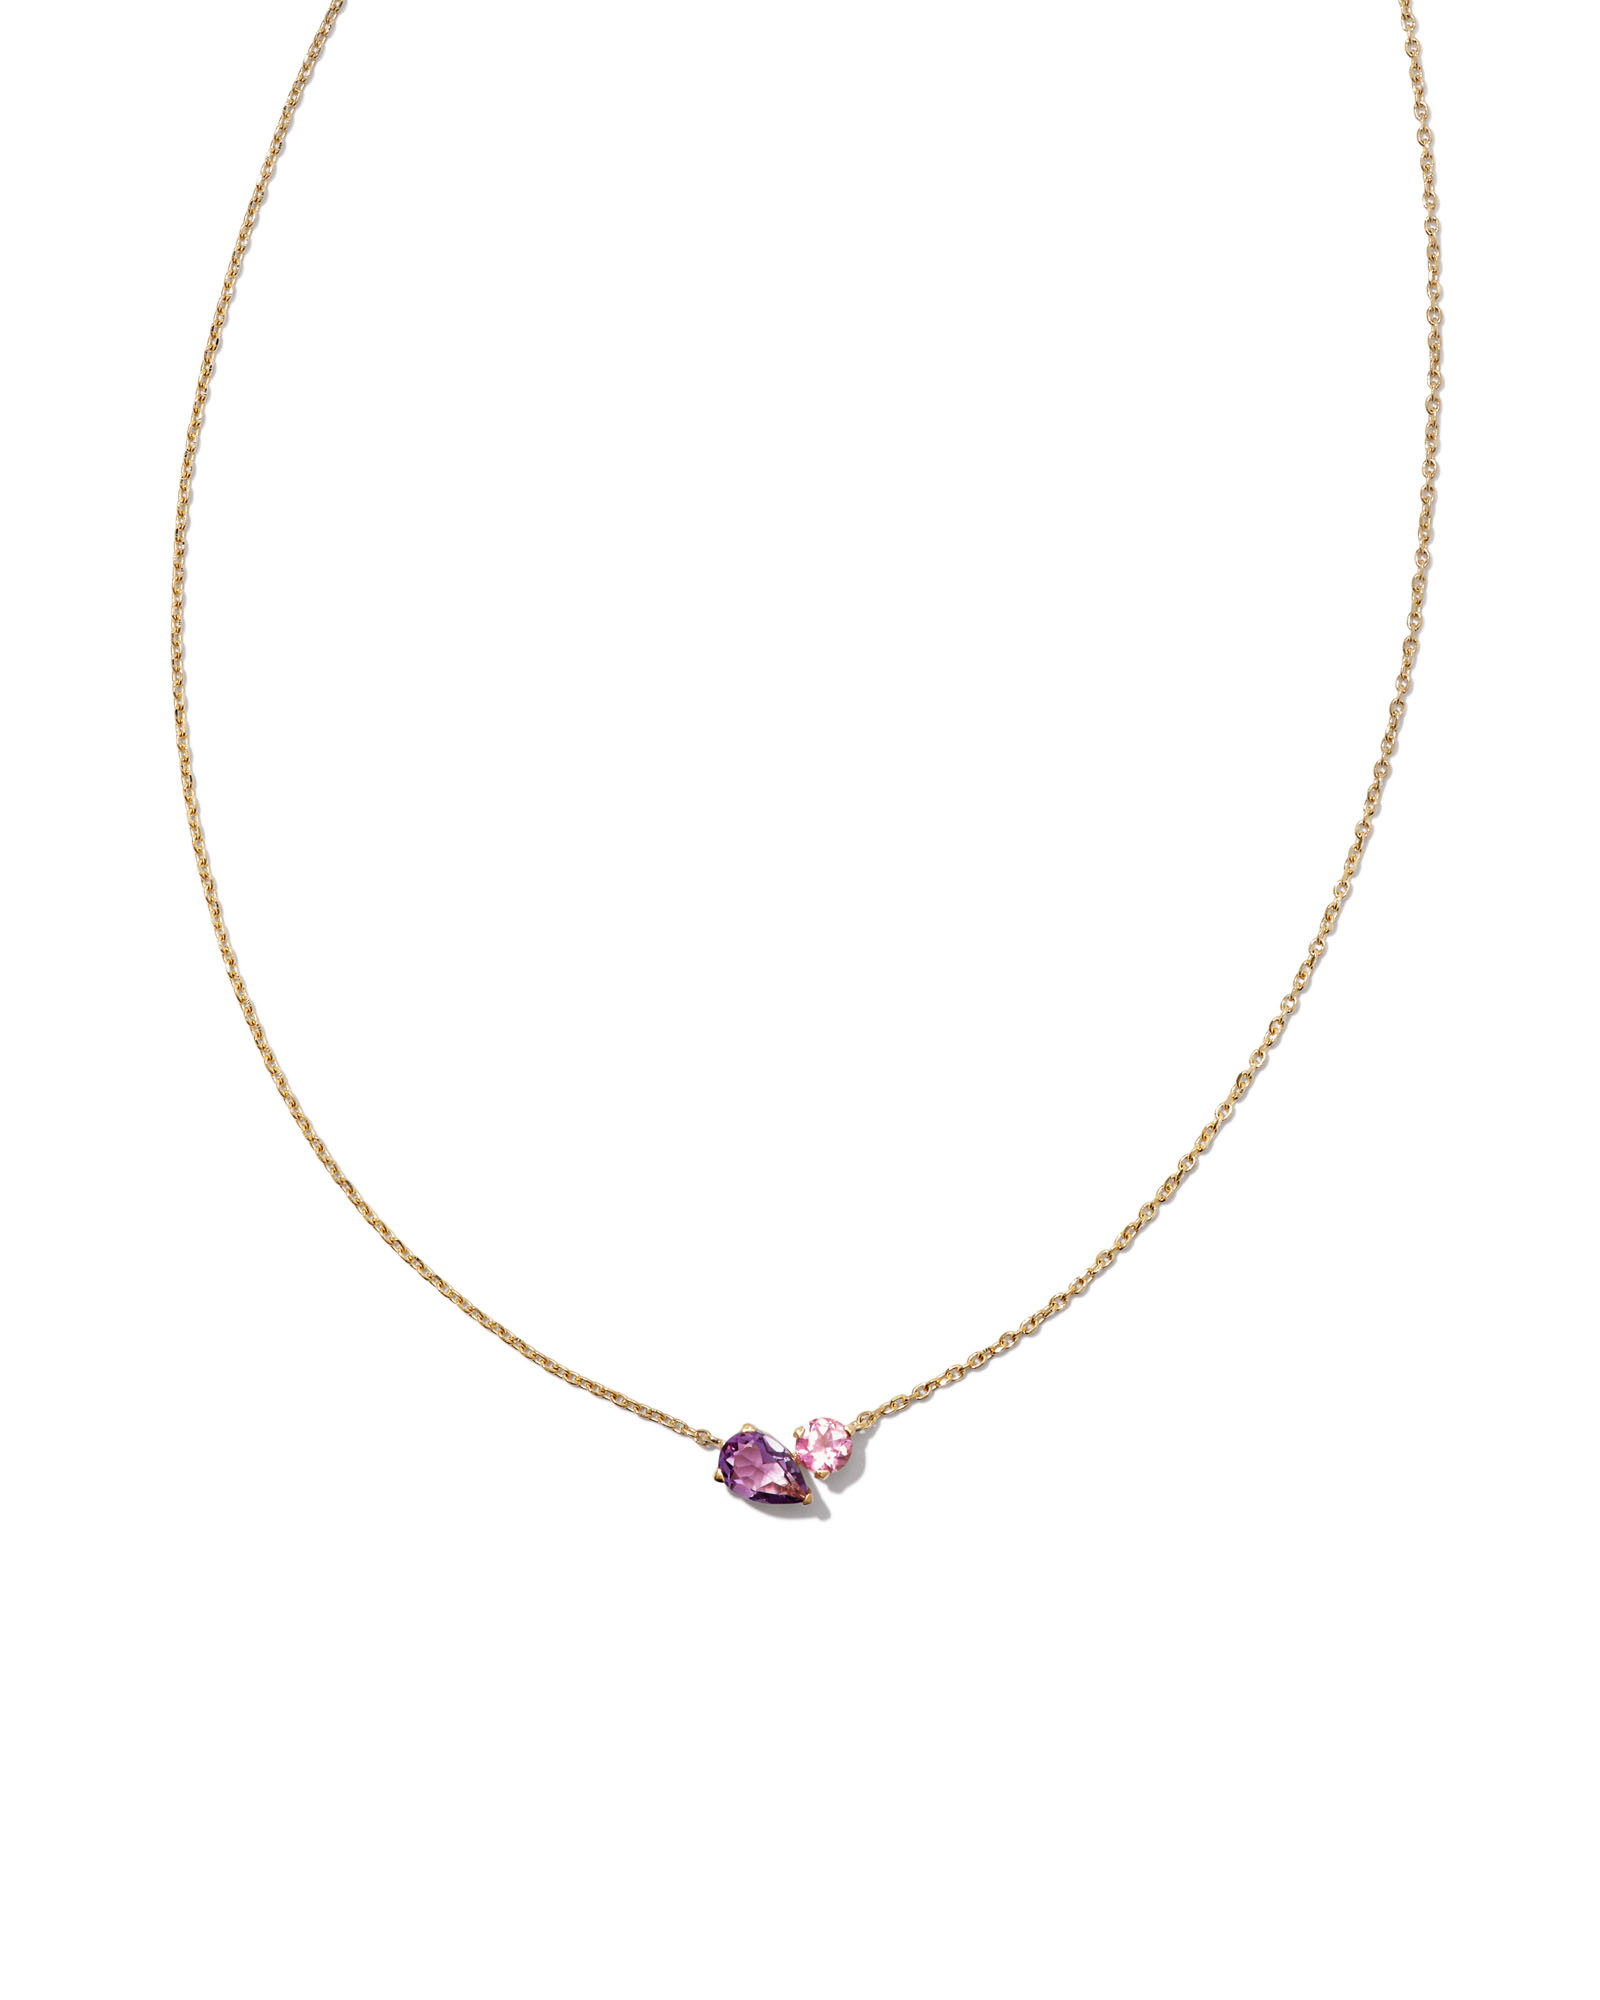 Toi et Moi 14k Yellow Gold Pendant Necklace in Light Pink Sapphire and ...